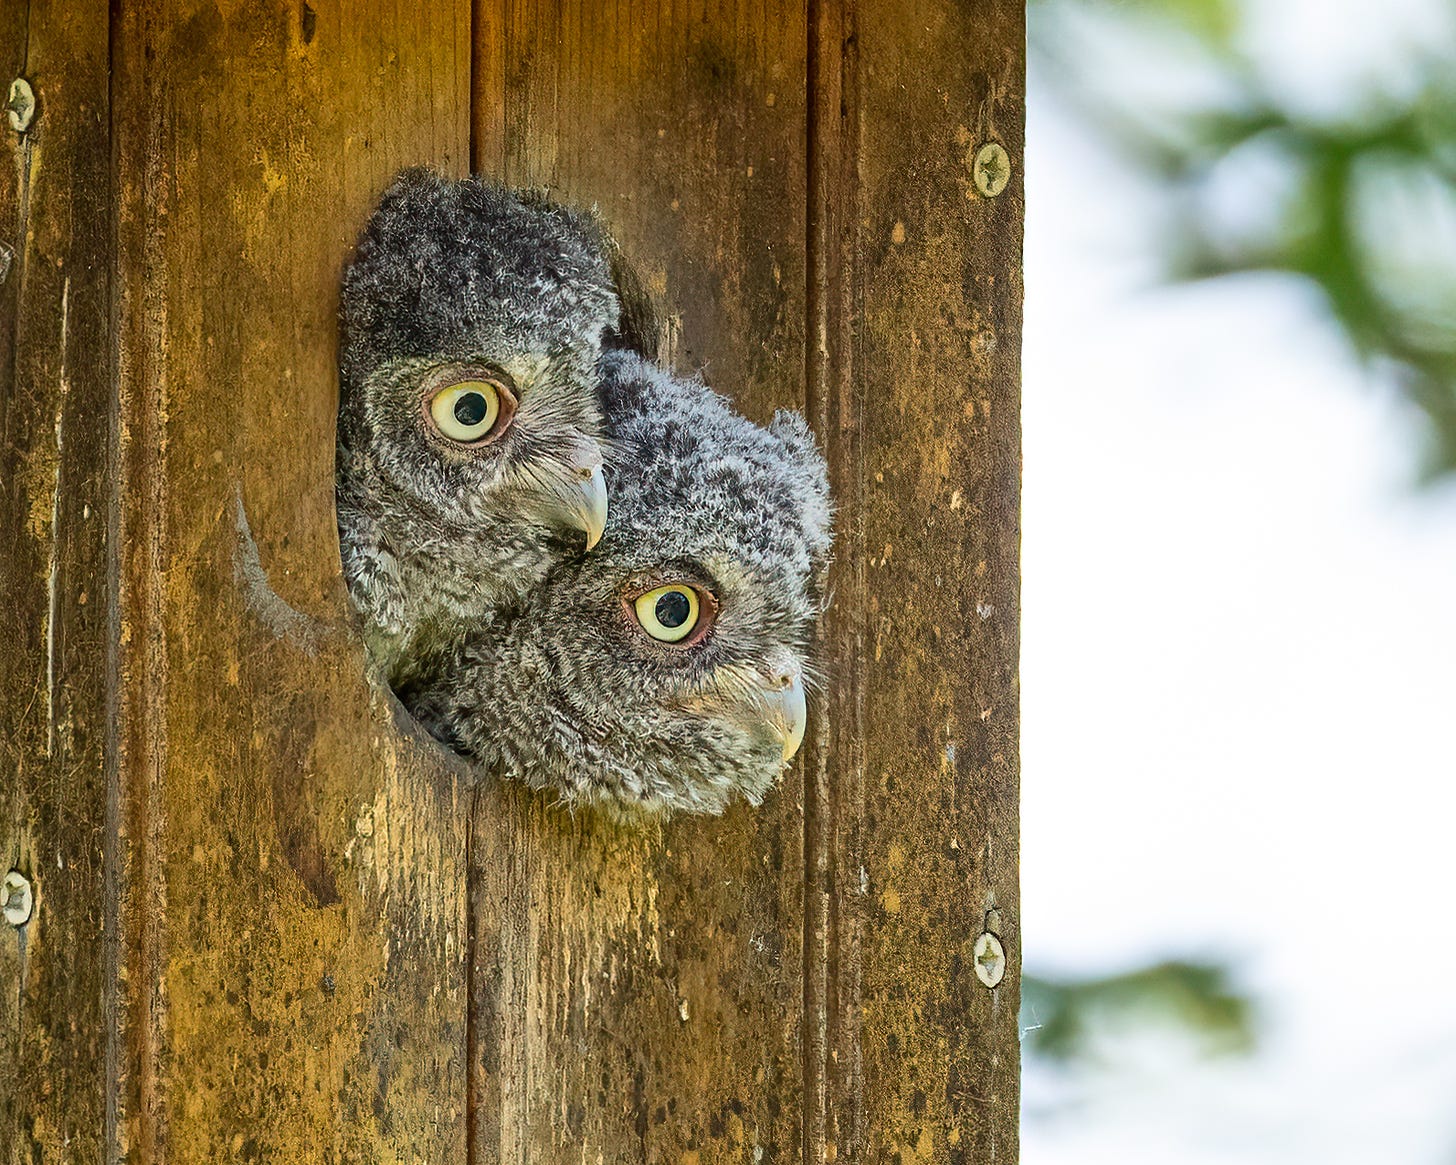 Two nestling screech owls stick their heads out of the screech owl box. They have big yellow eyes and curved beaks. They are both looking in the same direction.